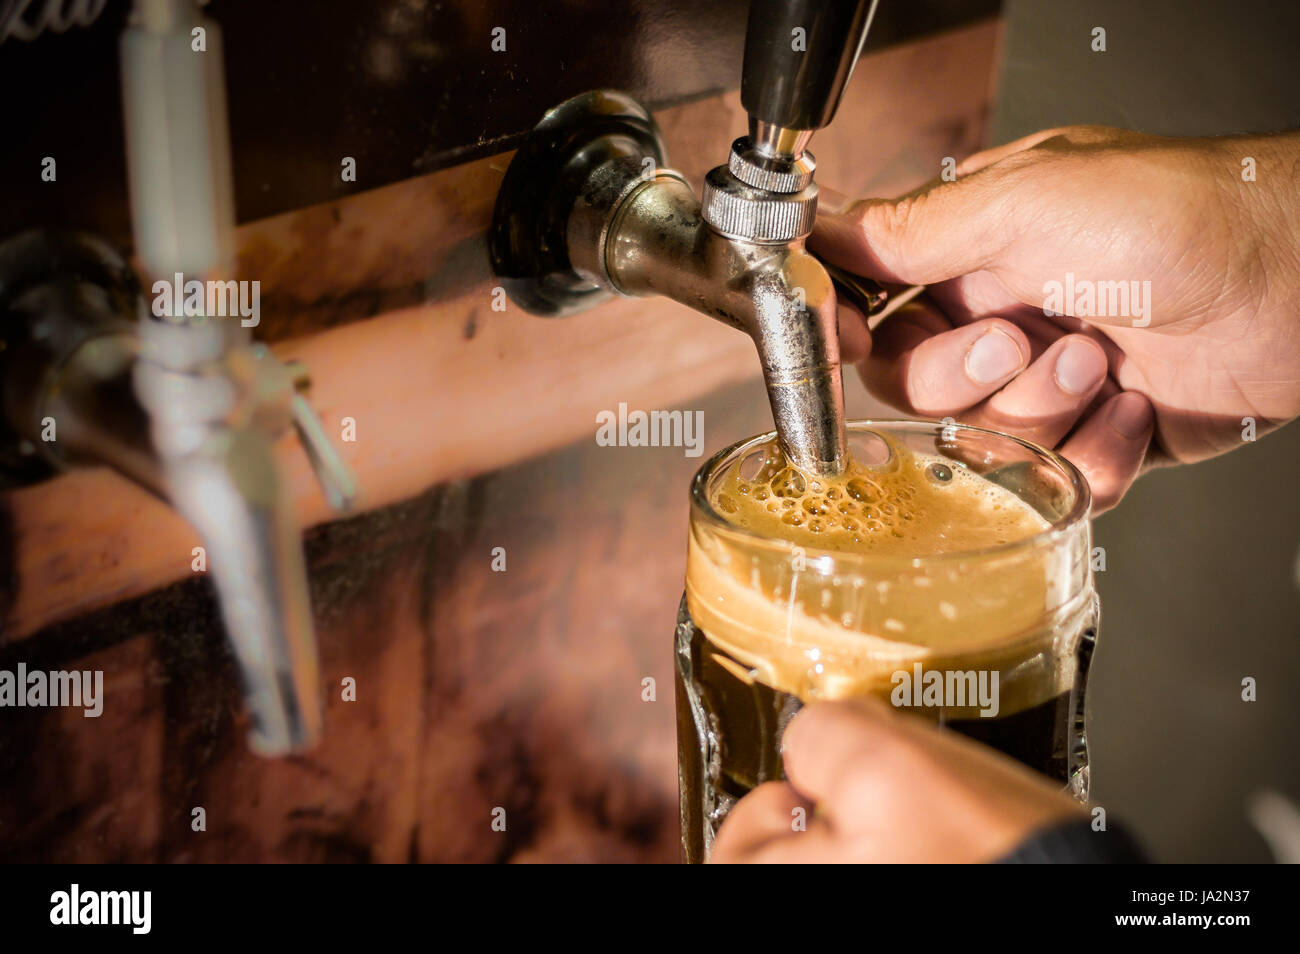 Bartender filling up with craft beer a pint glass Stock Photo